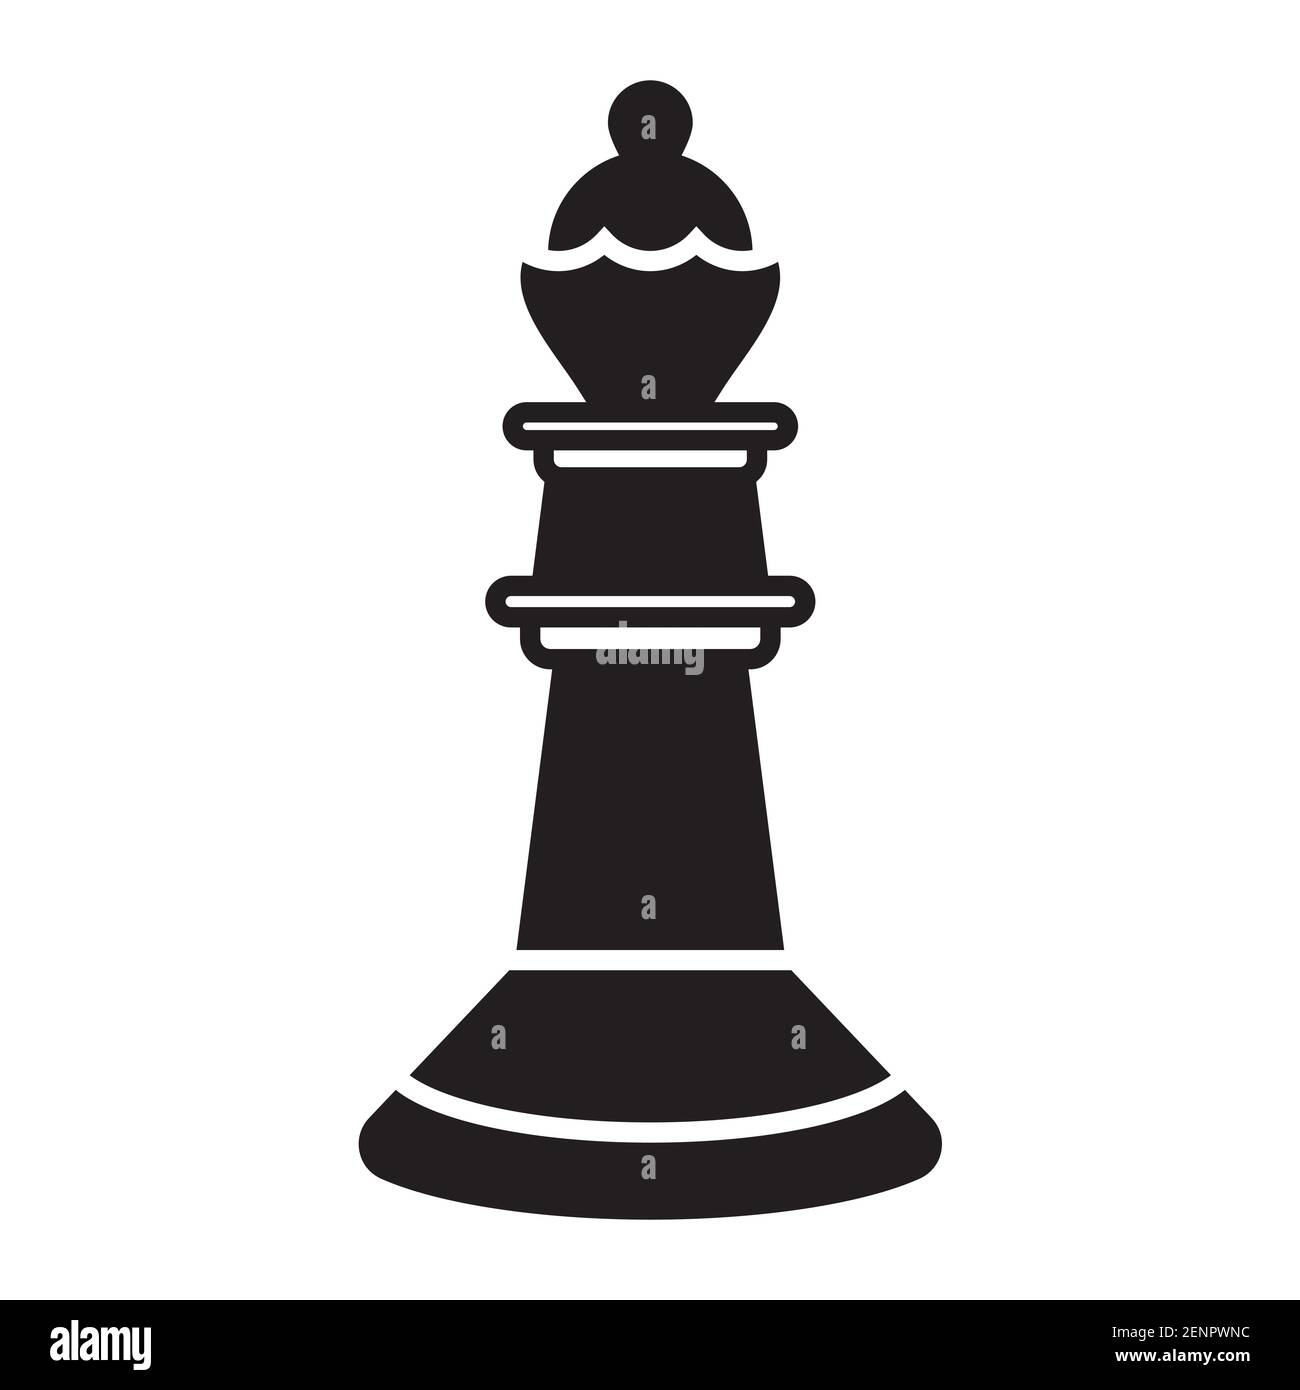 King and Queen Chess Piece Silhouette Graphic by martcorreo